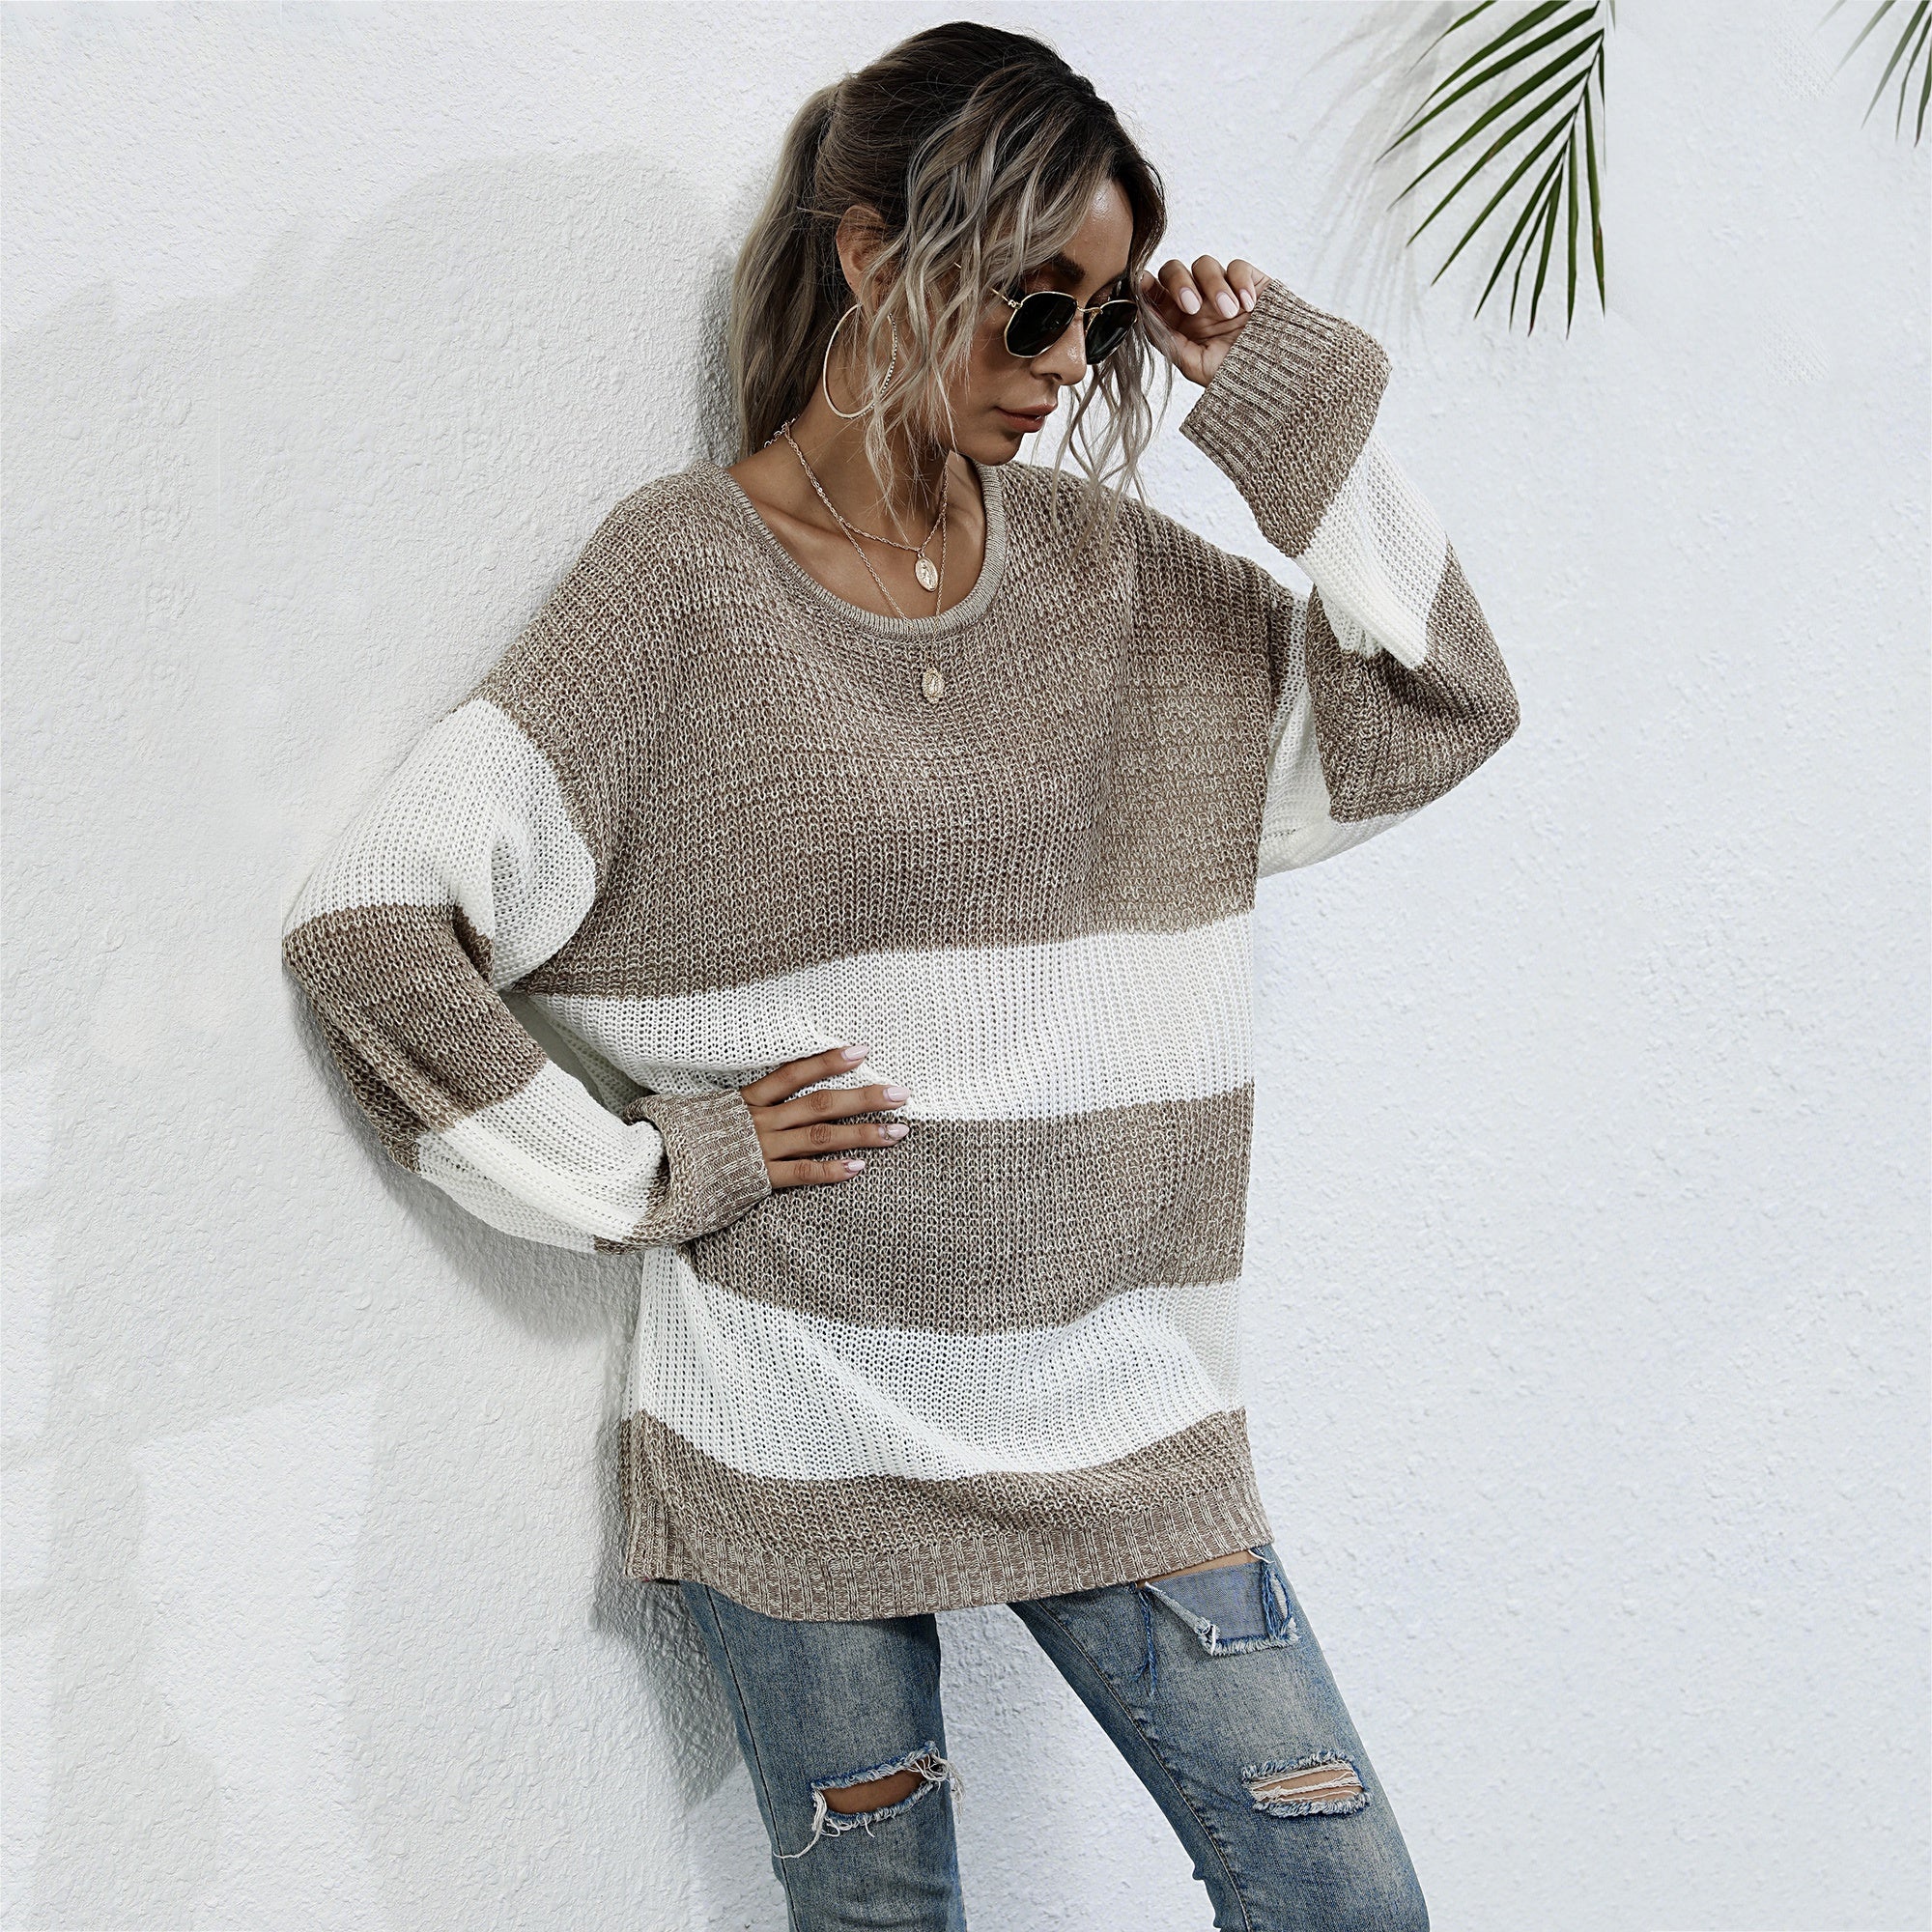 Striped Patchwork Loose Sweater Women Long Sleeve Plus Size Knitted Pullover Mid-length Sweater Sai Feel